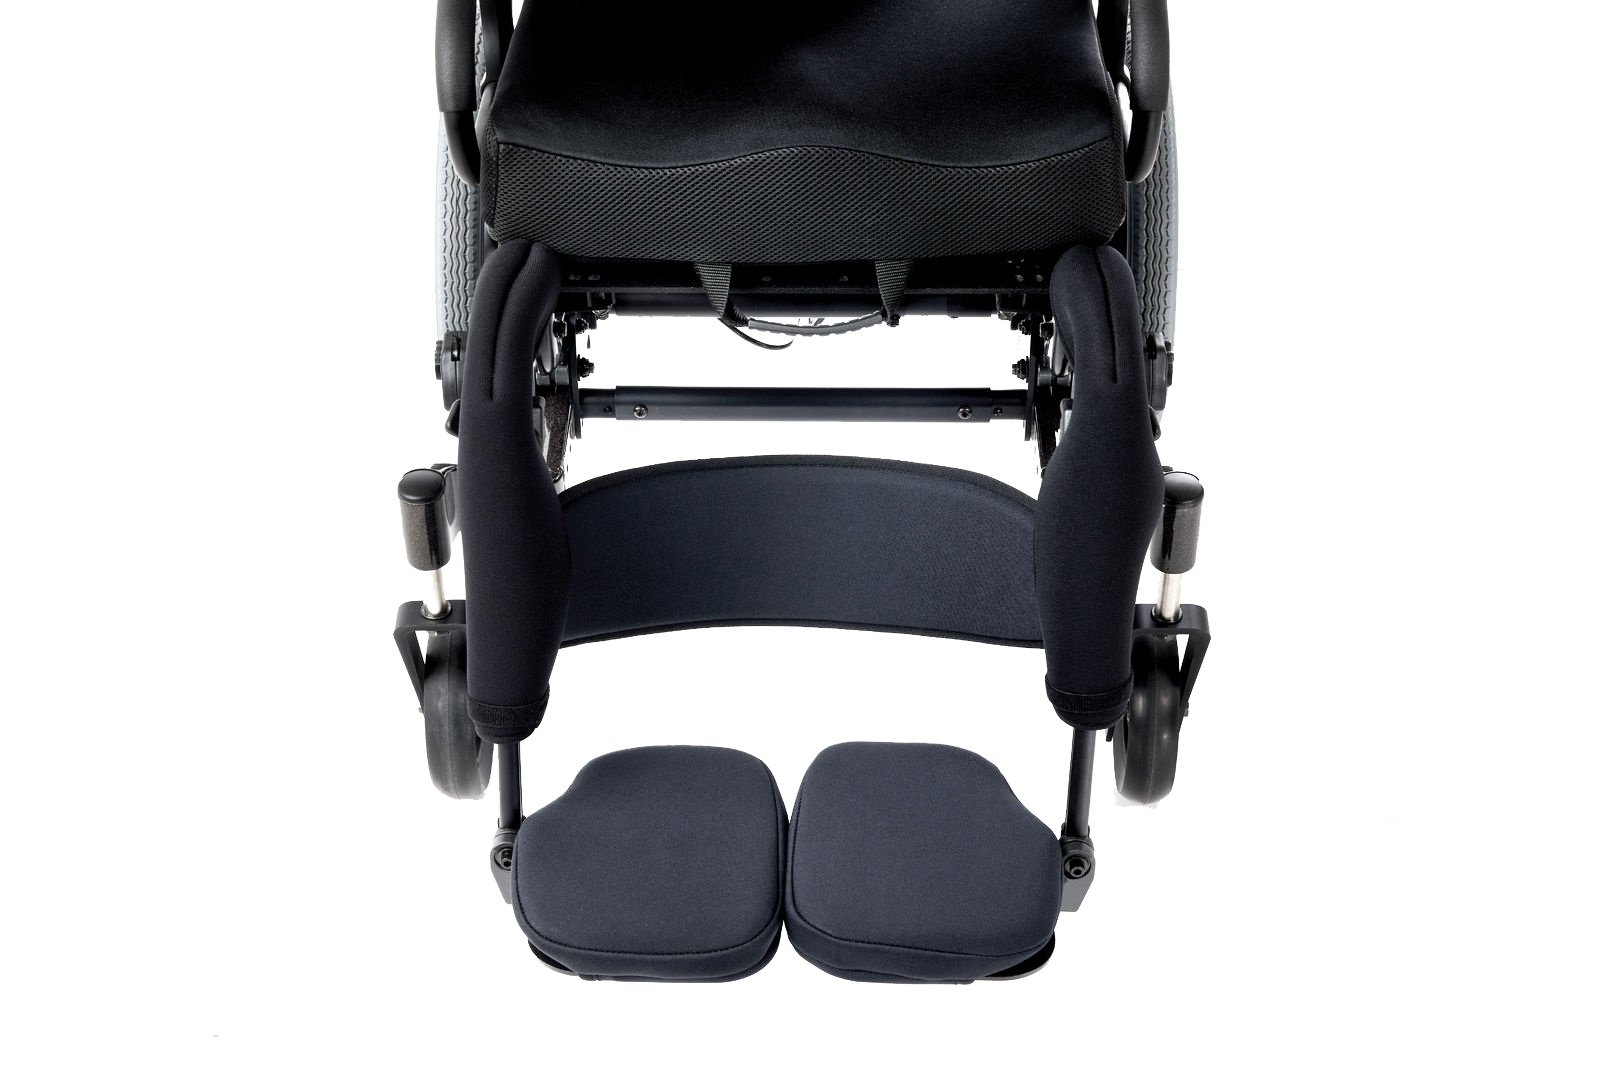 https://www.spexseating.com/wp-content/uploads/2022/08/Spex-Calf-Strap-on-Wheelchair-3-medium.png